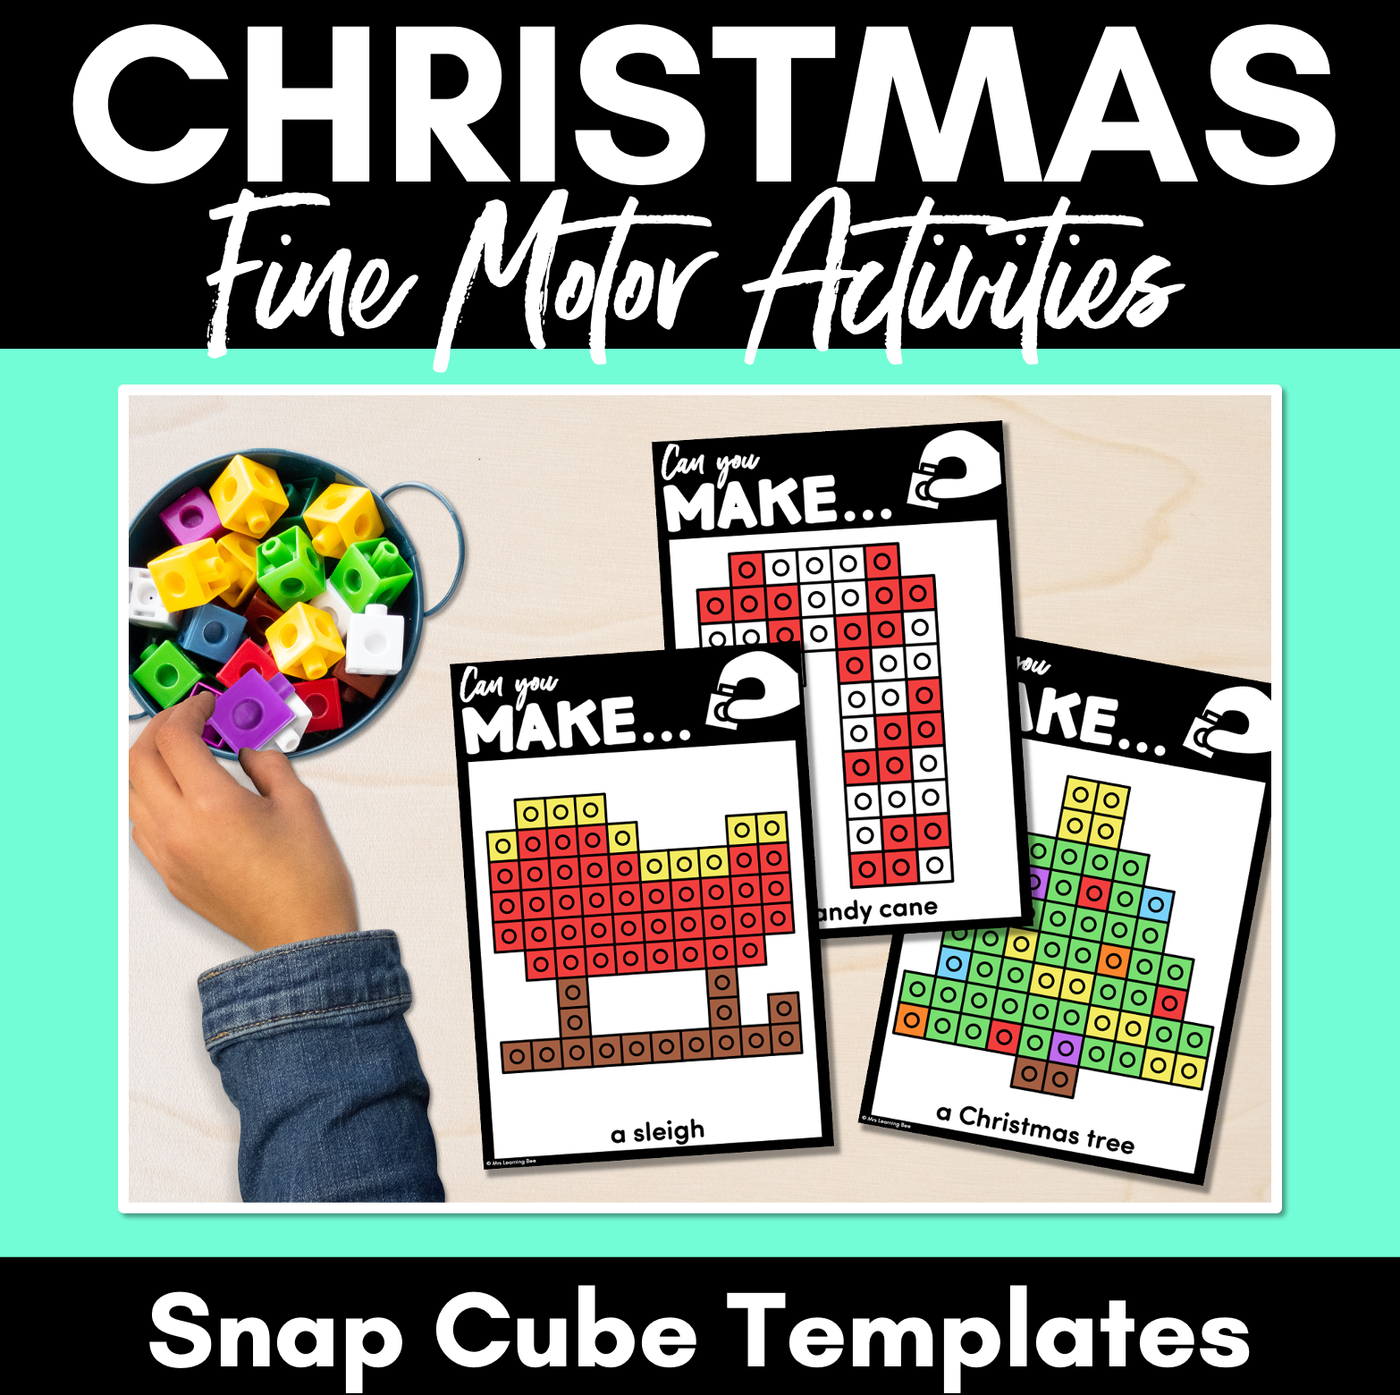 Fine Motor Christmas Activities - Snap Cube Cube Templates